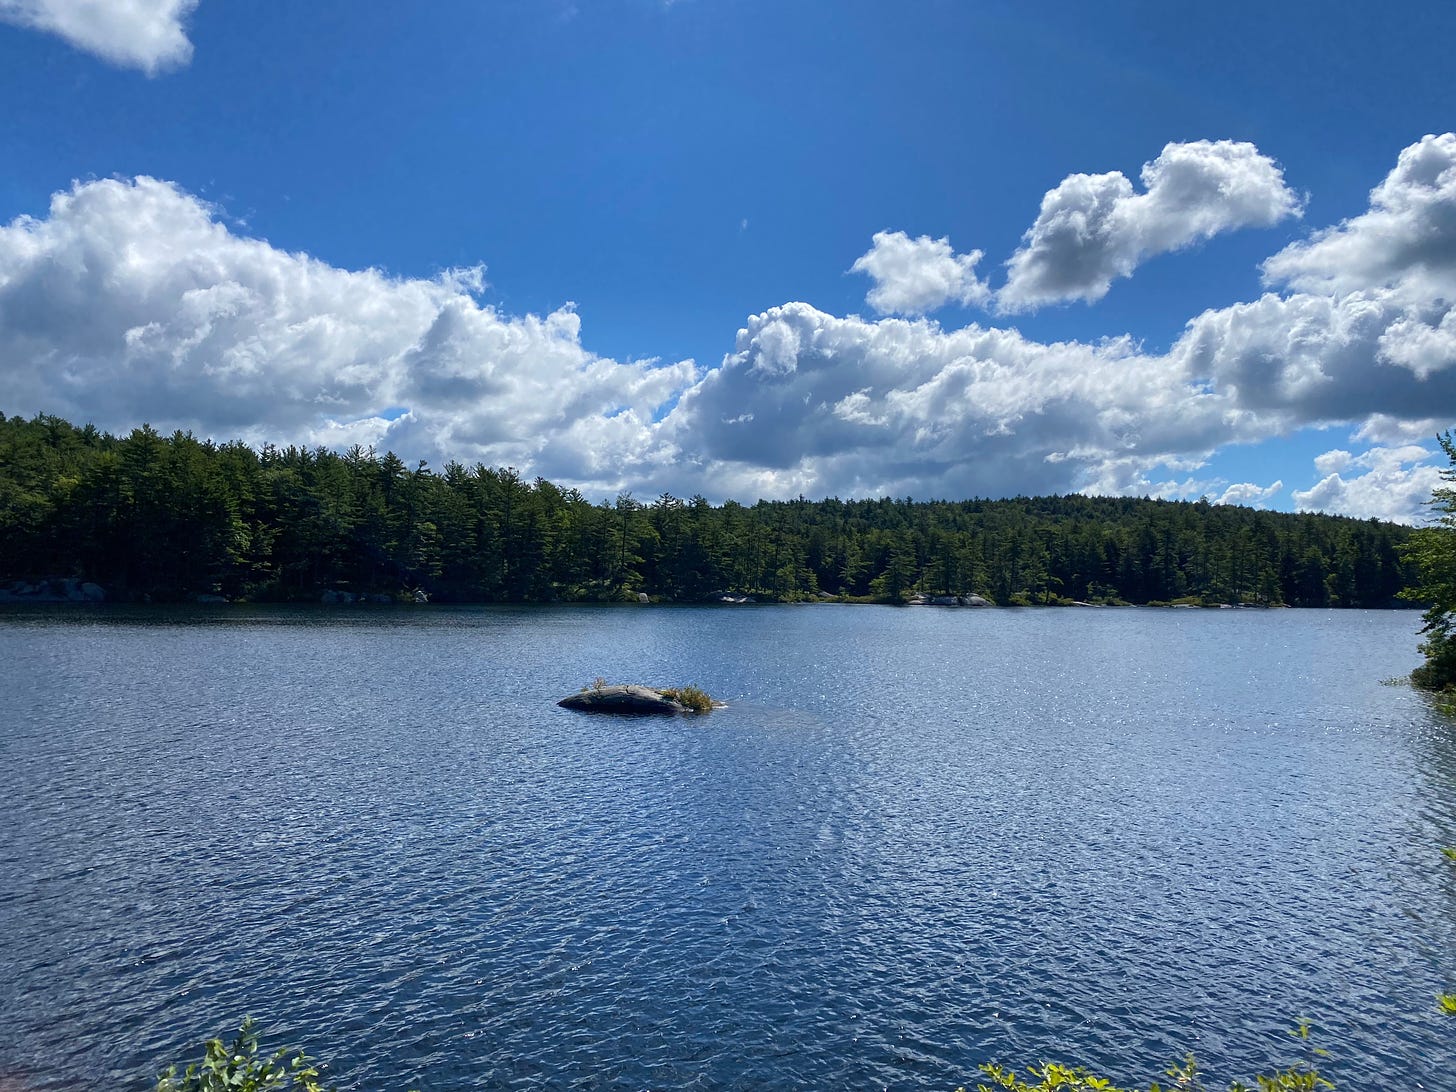 View of a wide blue pond surrounded by evergreen trees on its far bank, under a deep blue sky filled with big white clouds.